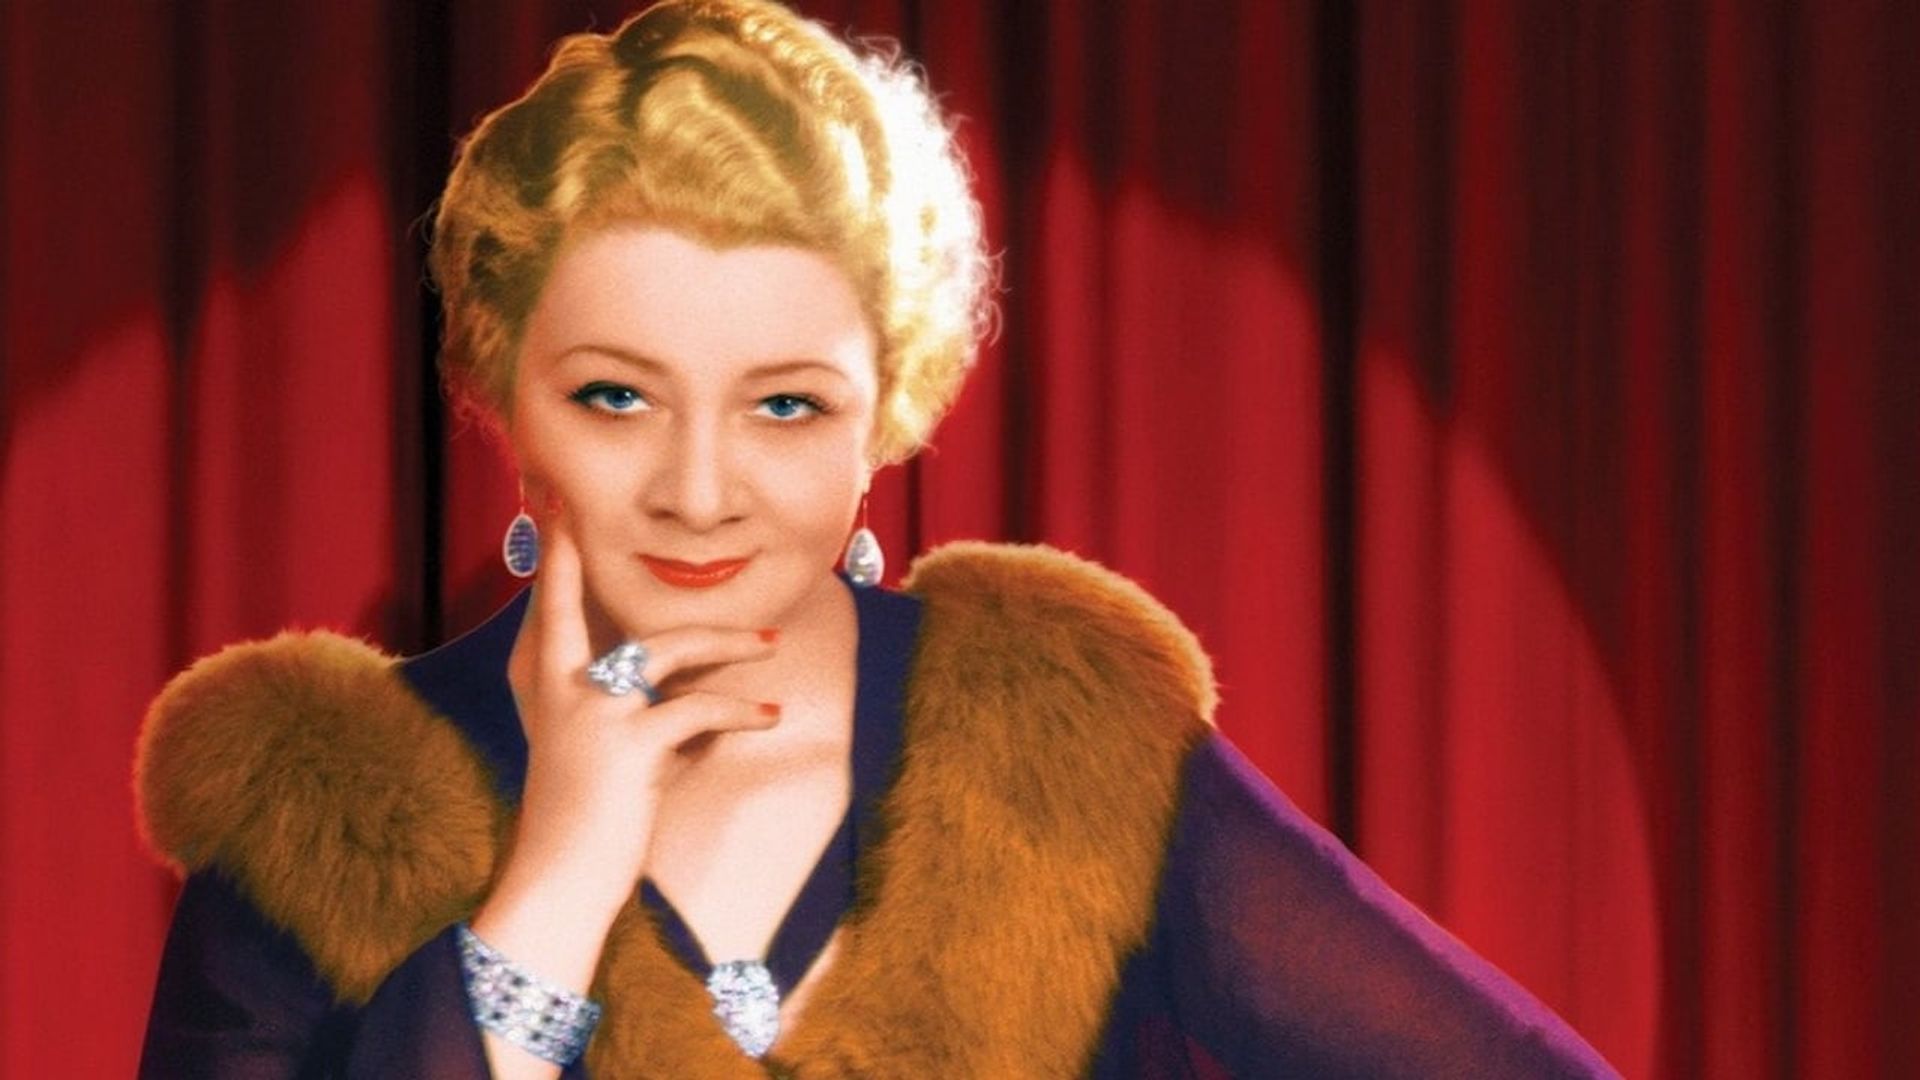 The Outrageous Sophie Tucker background